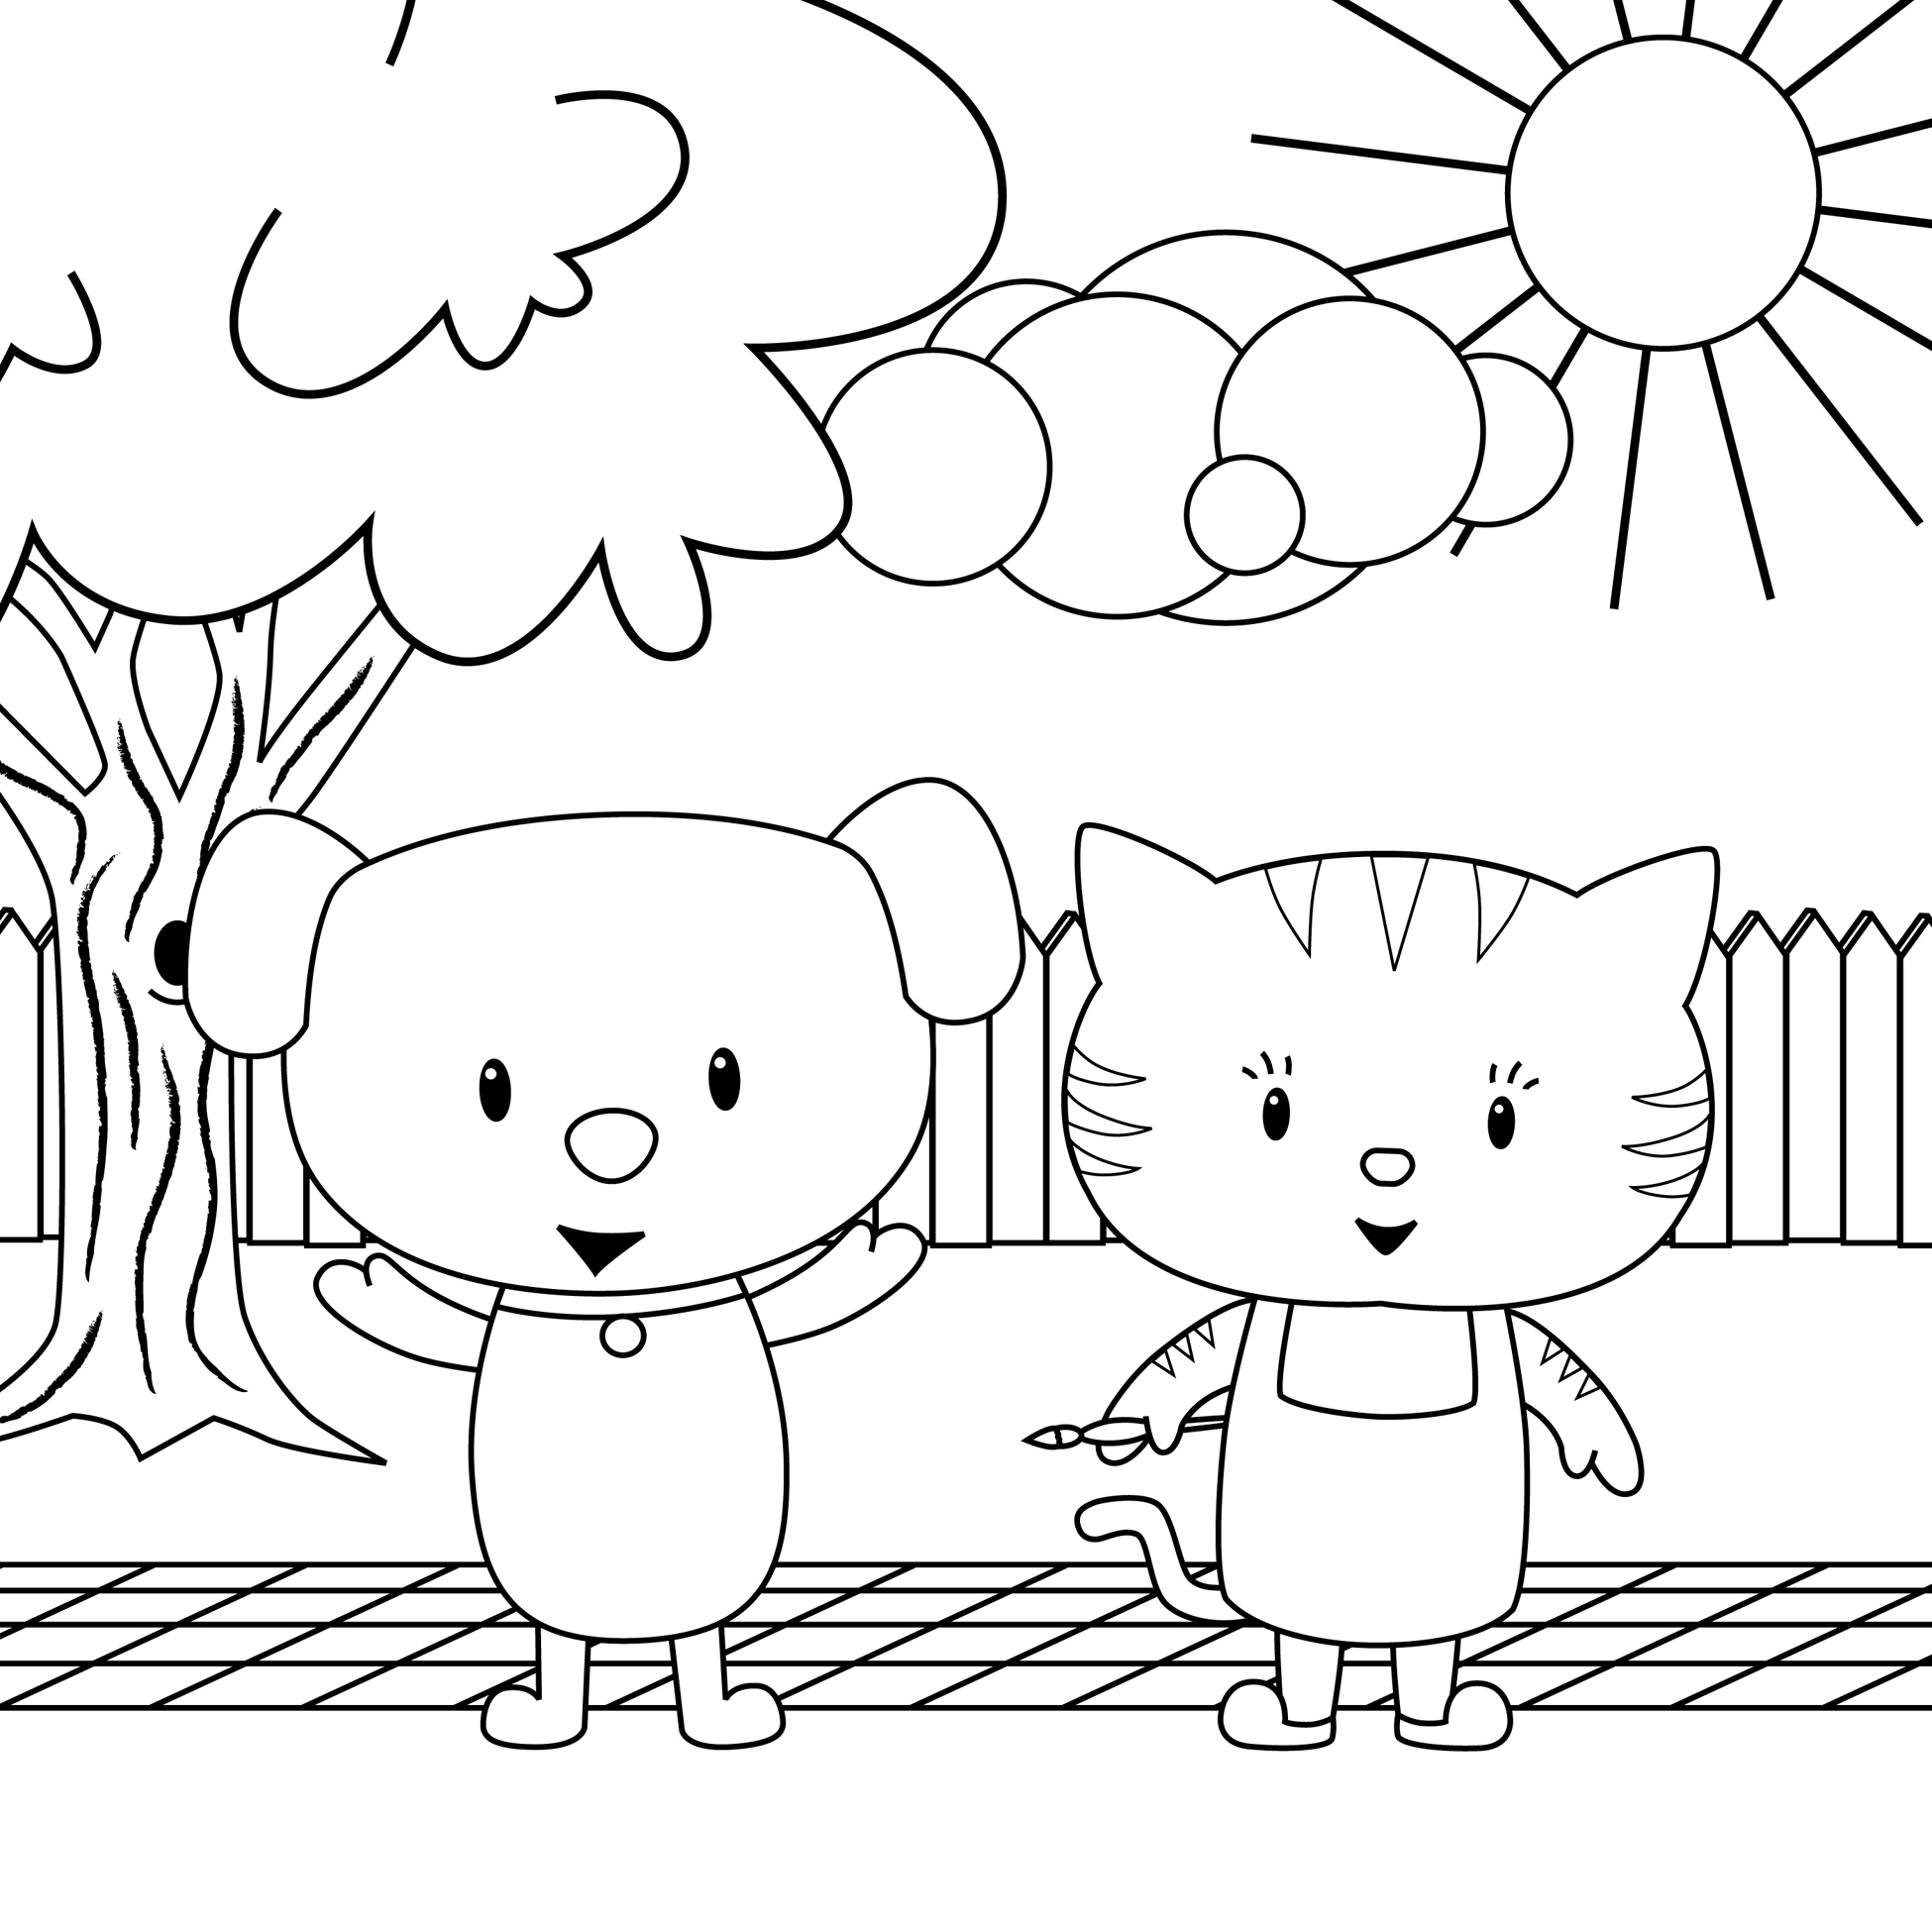 dog-and-cat-coloring-pages-updated-2021-cat-and-dog-coloring-pages-to